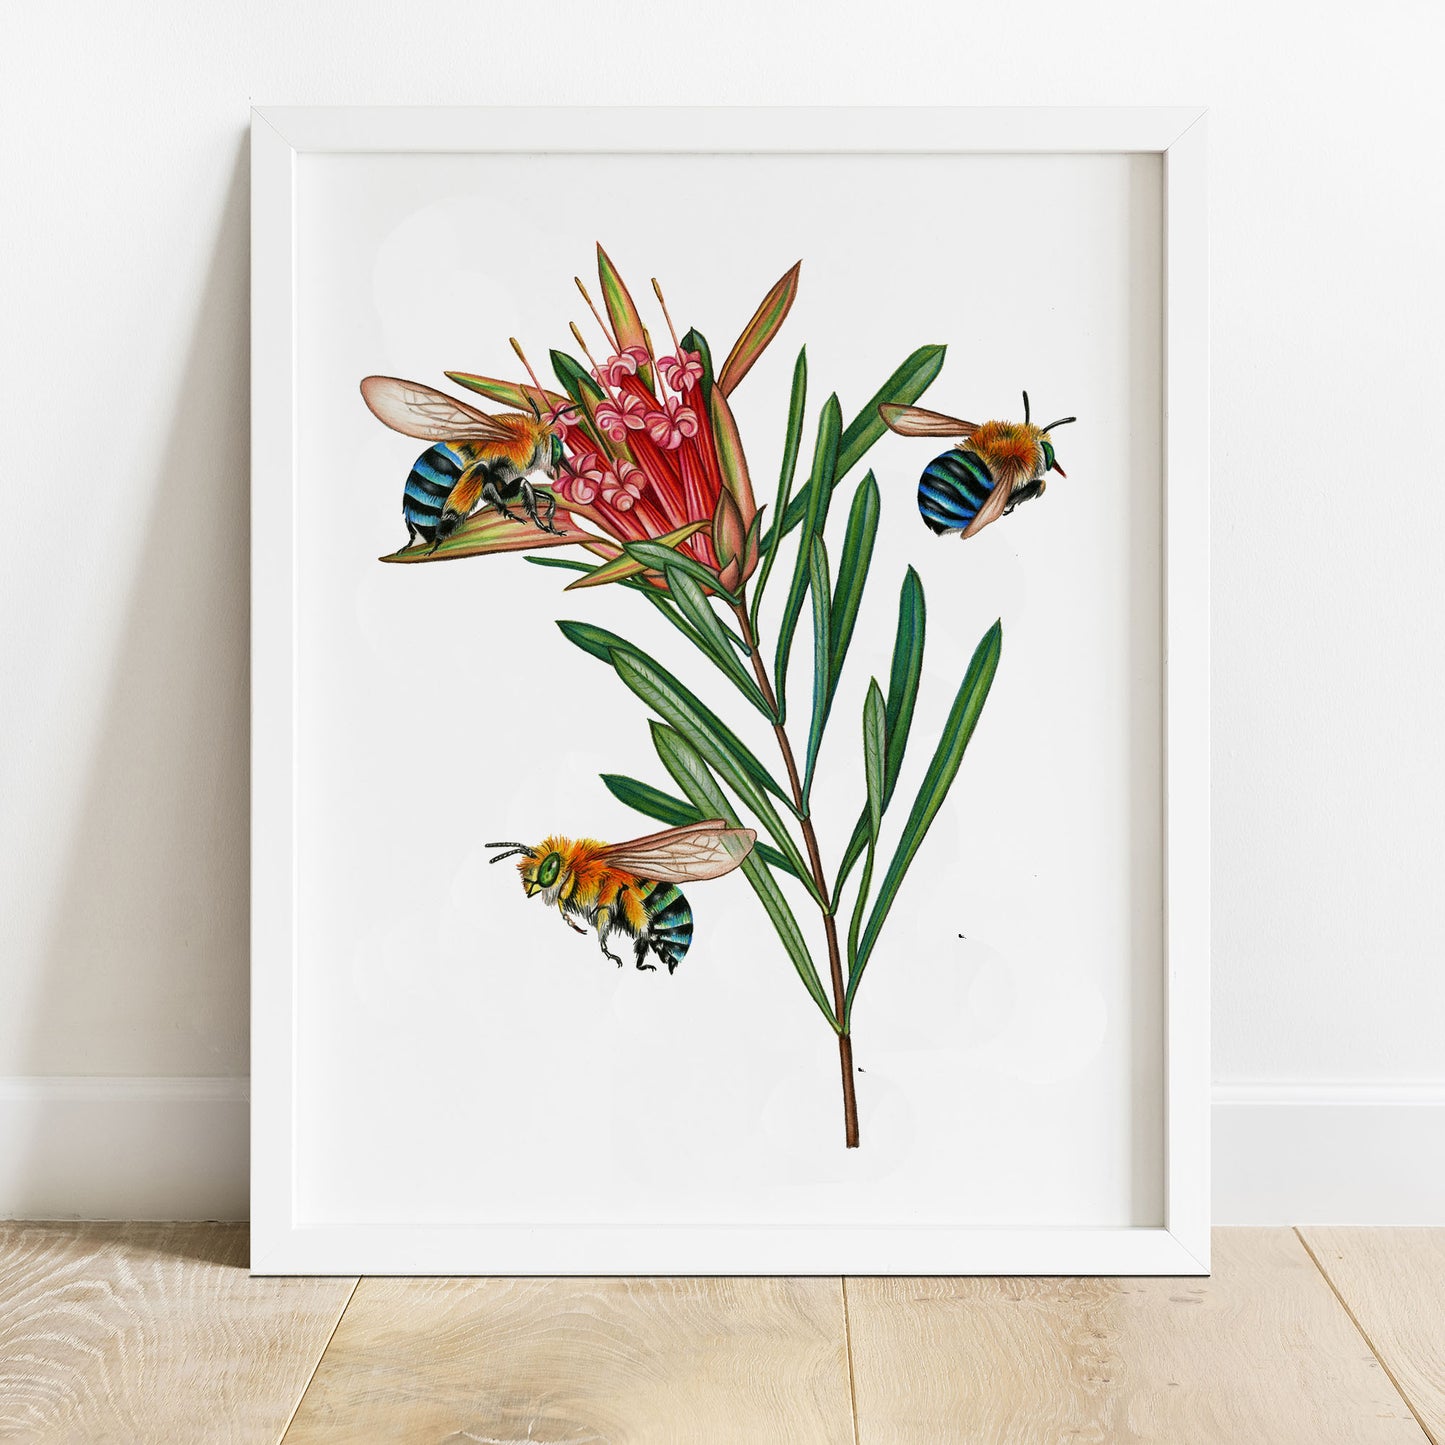 Hand drawn pencil art of blue-banded bees on a protea flower by Rachel Diaz-Bastin. Prints available.